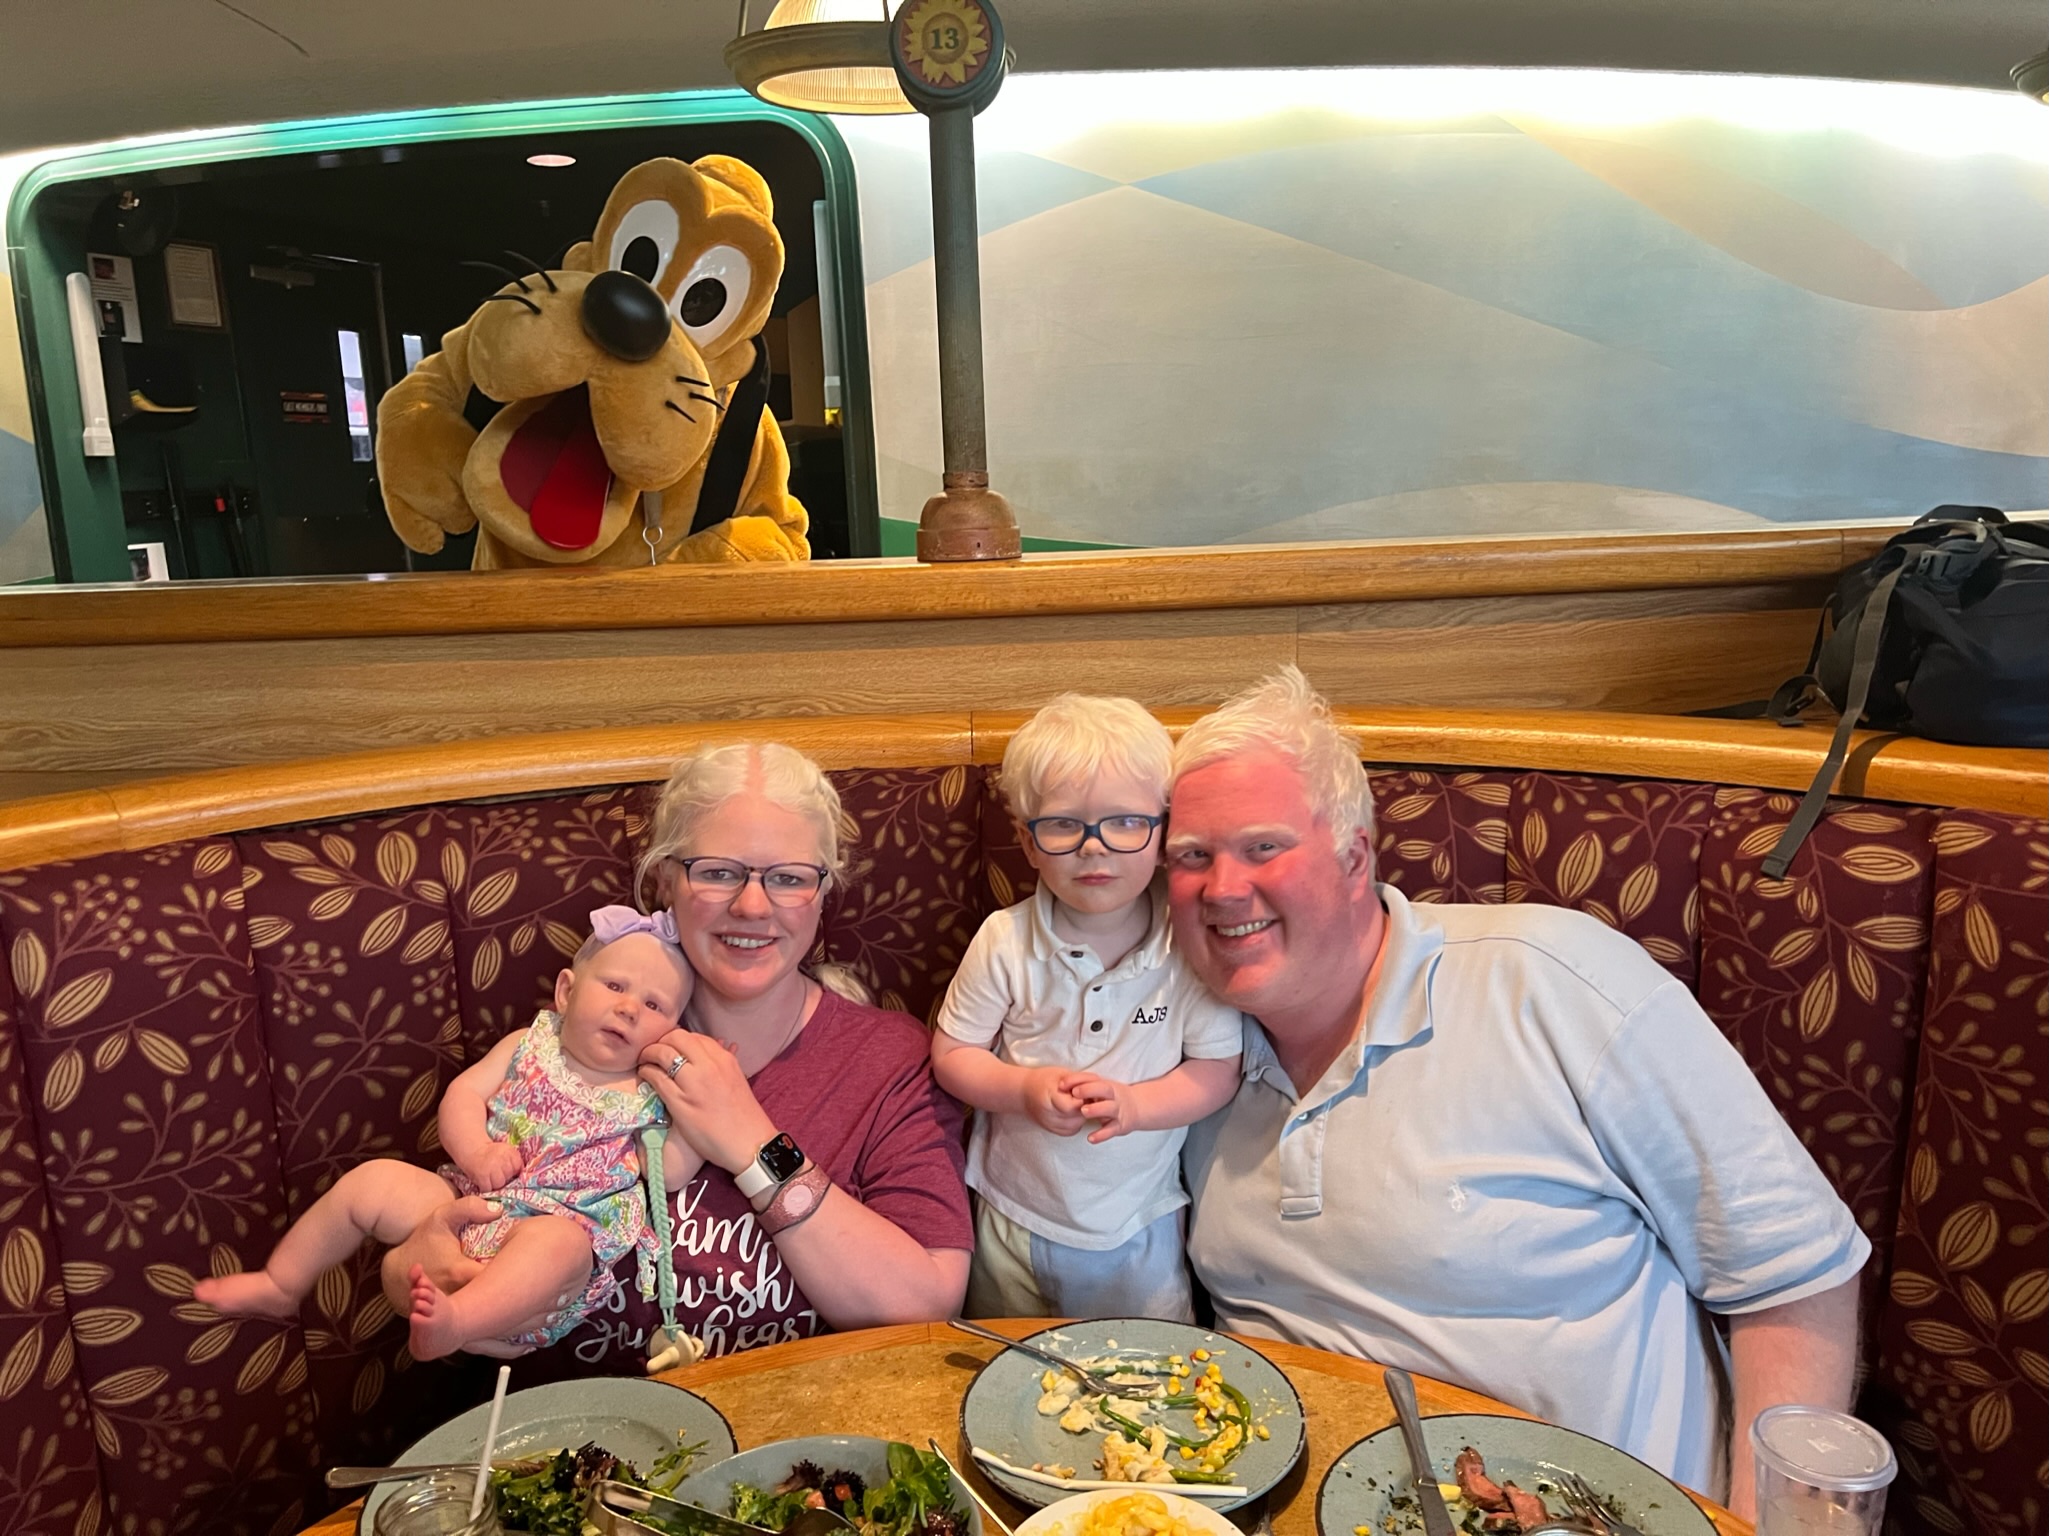 Andrew, Katherine, AJ, Charlotte, and Pluto at The Garden Grill restaurant